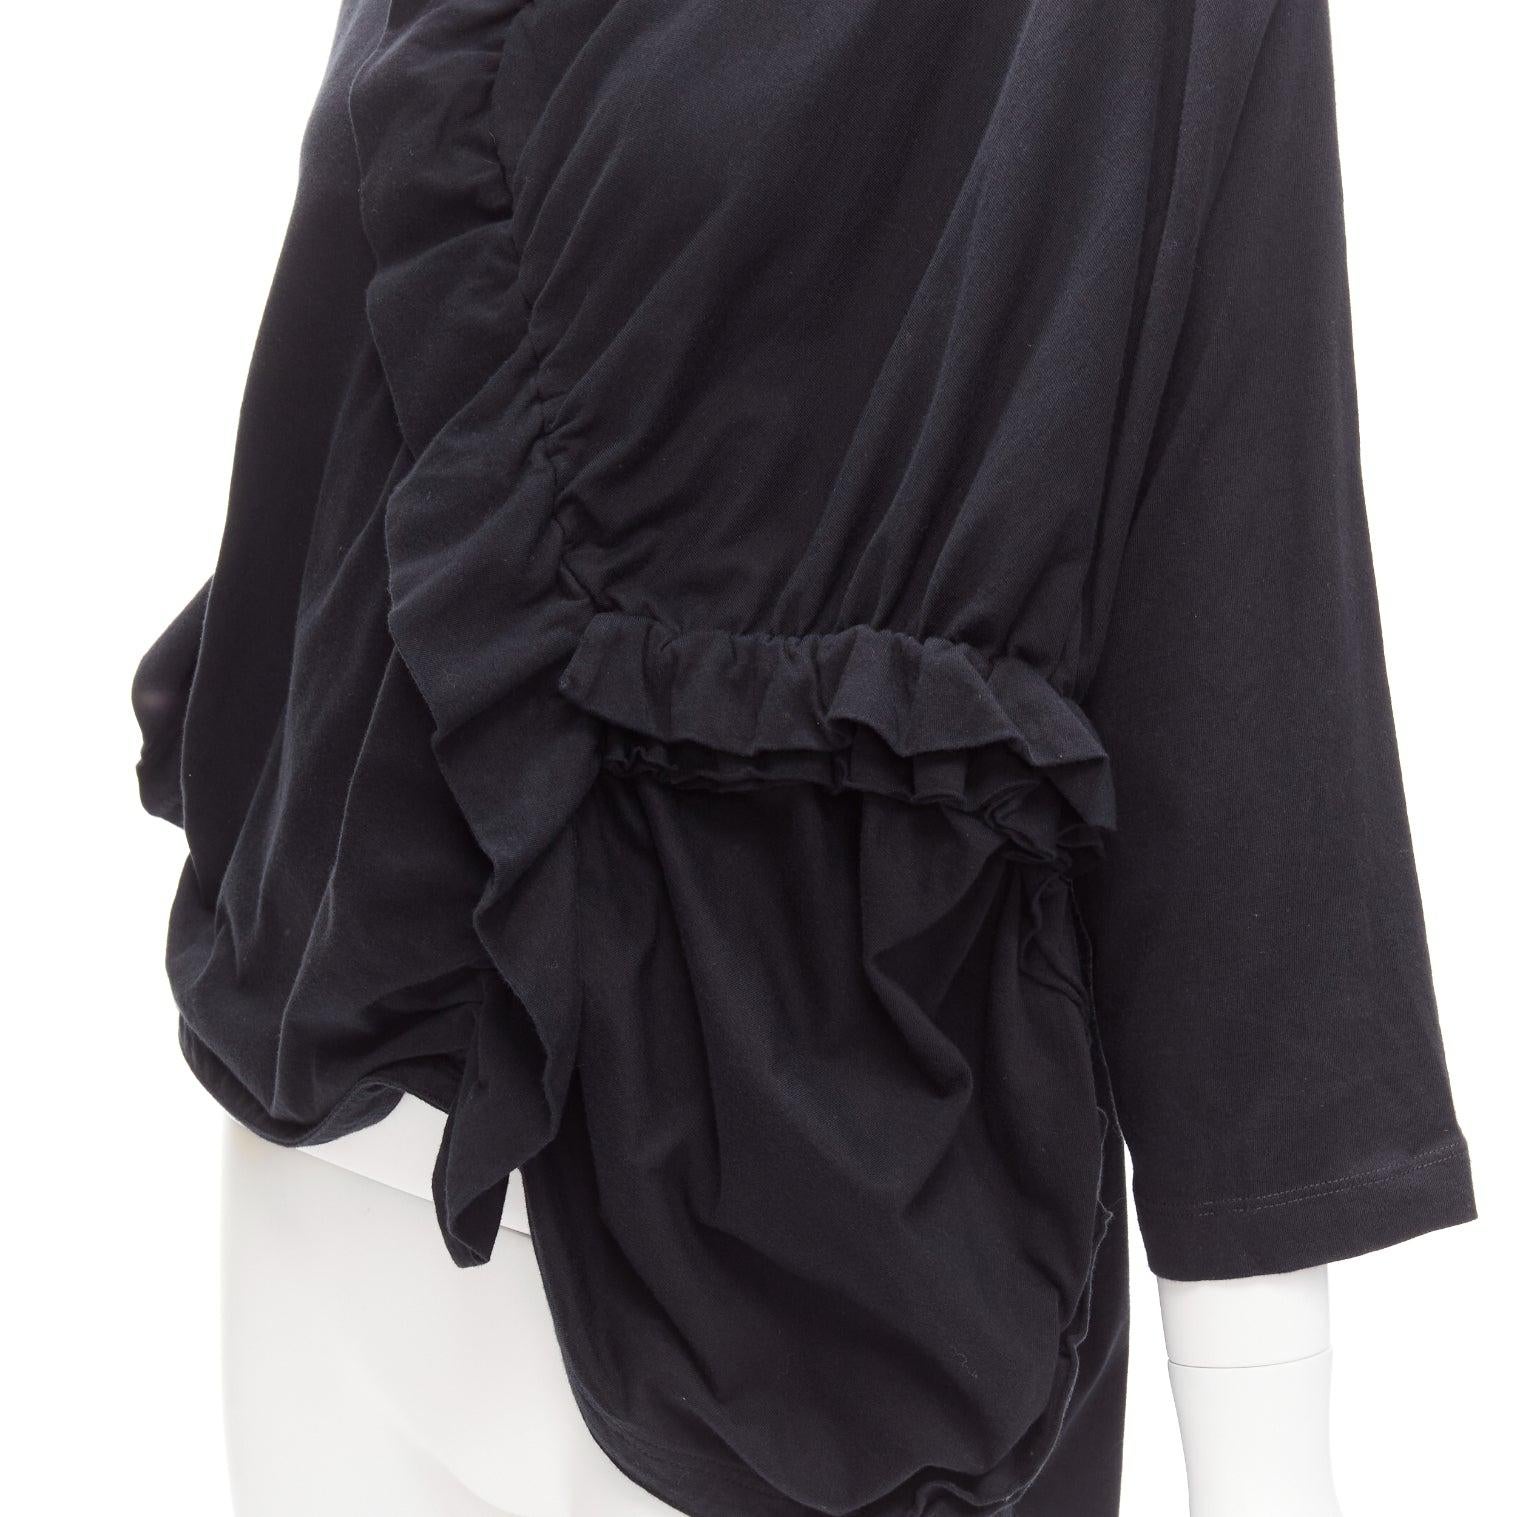 MARNI black 100% cotton gathered ruffles 3/4 sleeves boxy top IT36 XS
Reference: CELG/A00313
Brand: Marni
Material: Cotton
Color: Black
Pattern: Solid
Closure: Slip On
Made in: Italy

CONDITION:
Condition: Excellent, this item was pre-owned and is